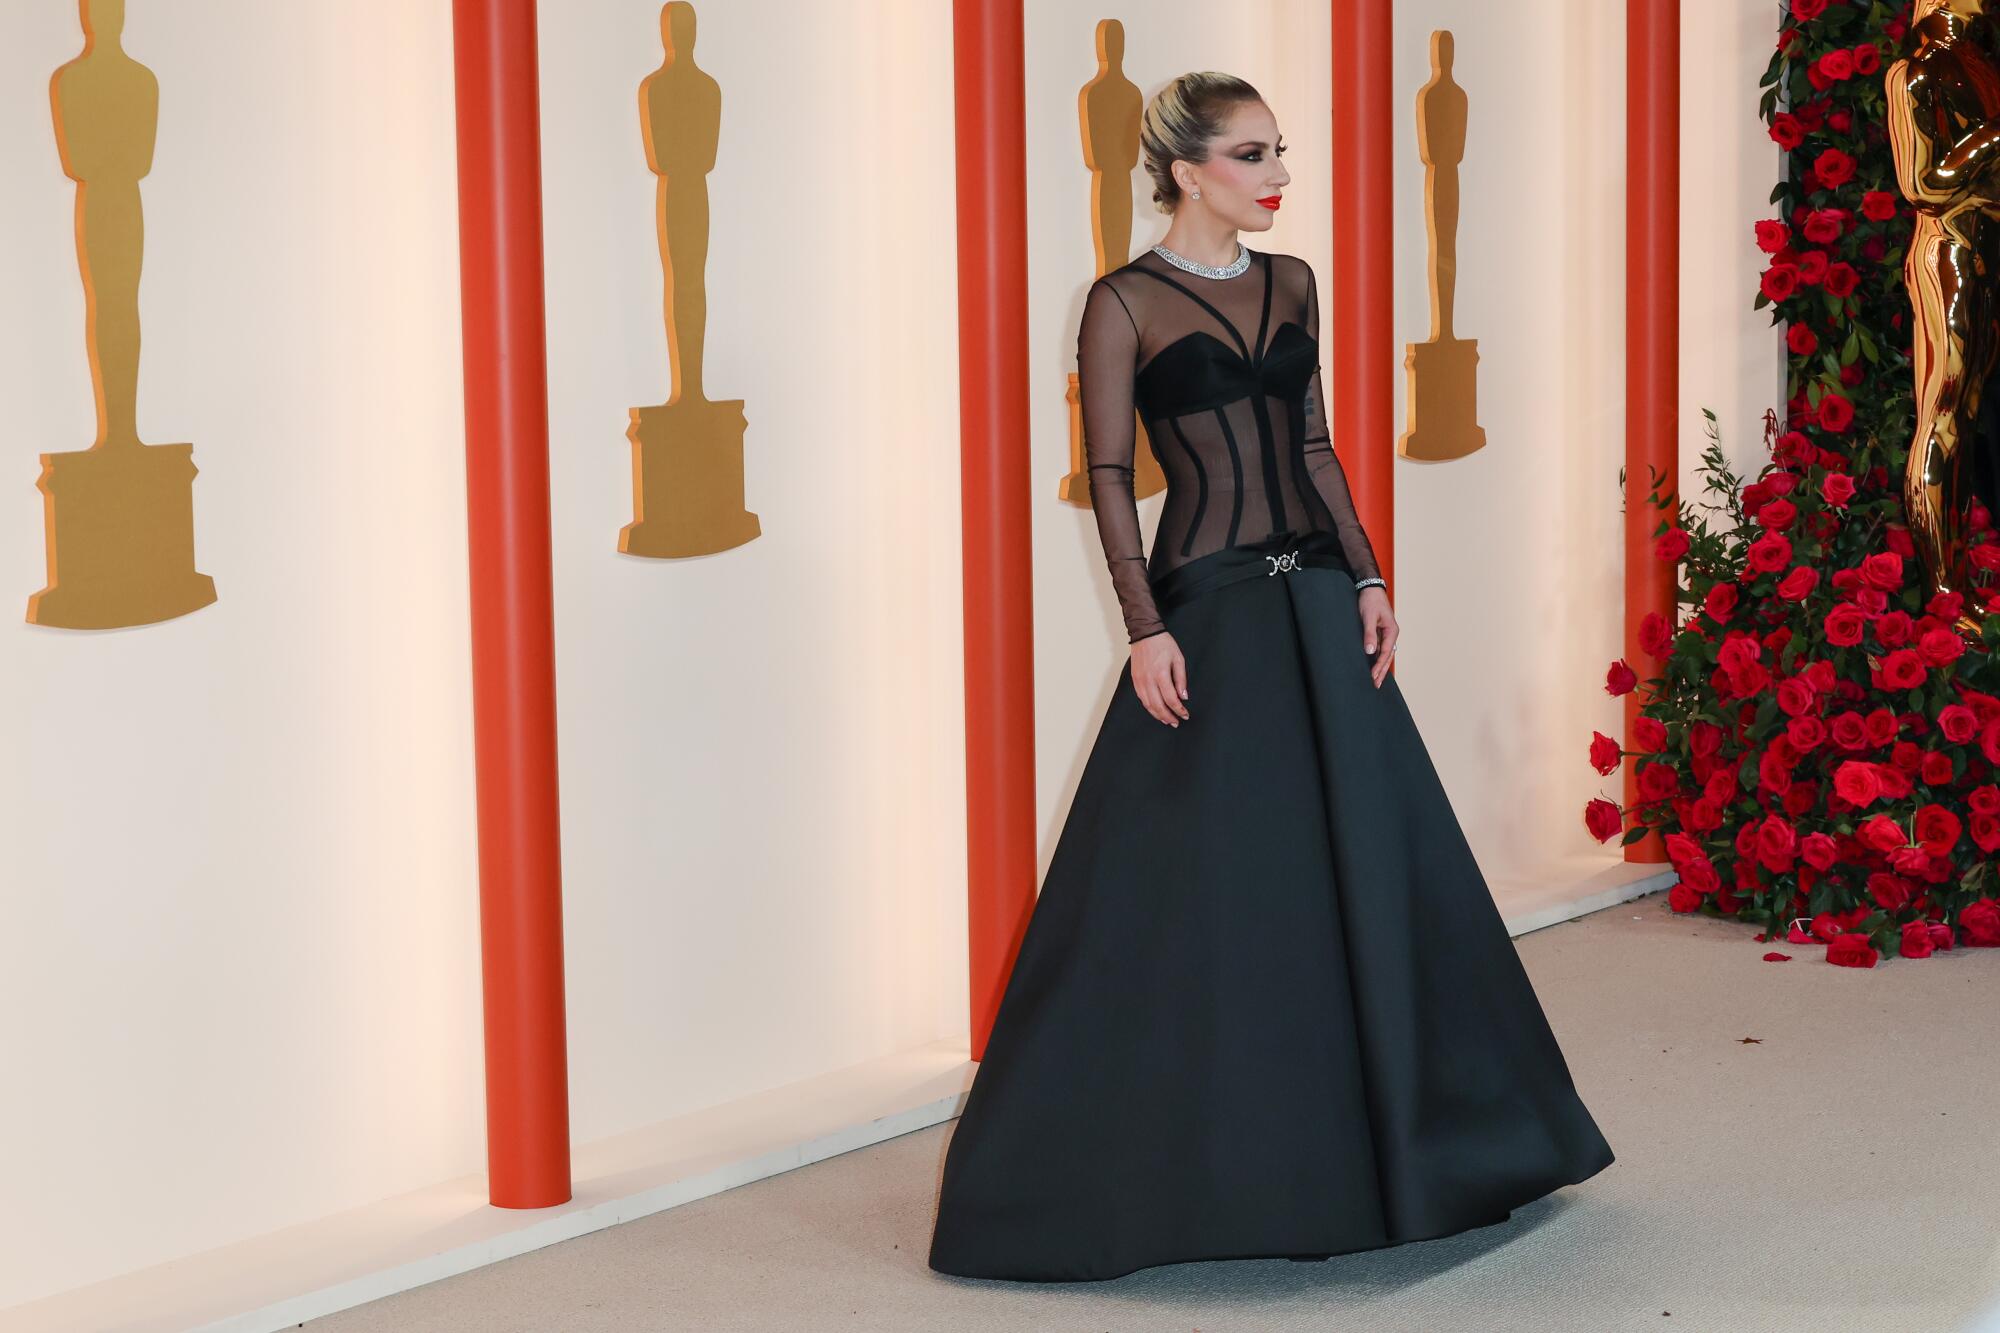 7 Red-Carpet Dresses You Can Expect to See at Every Awards Show